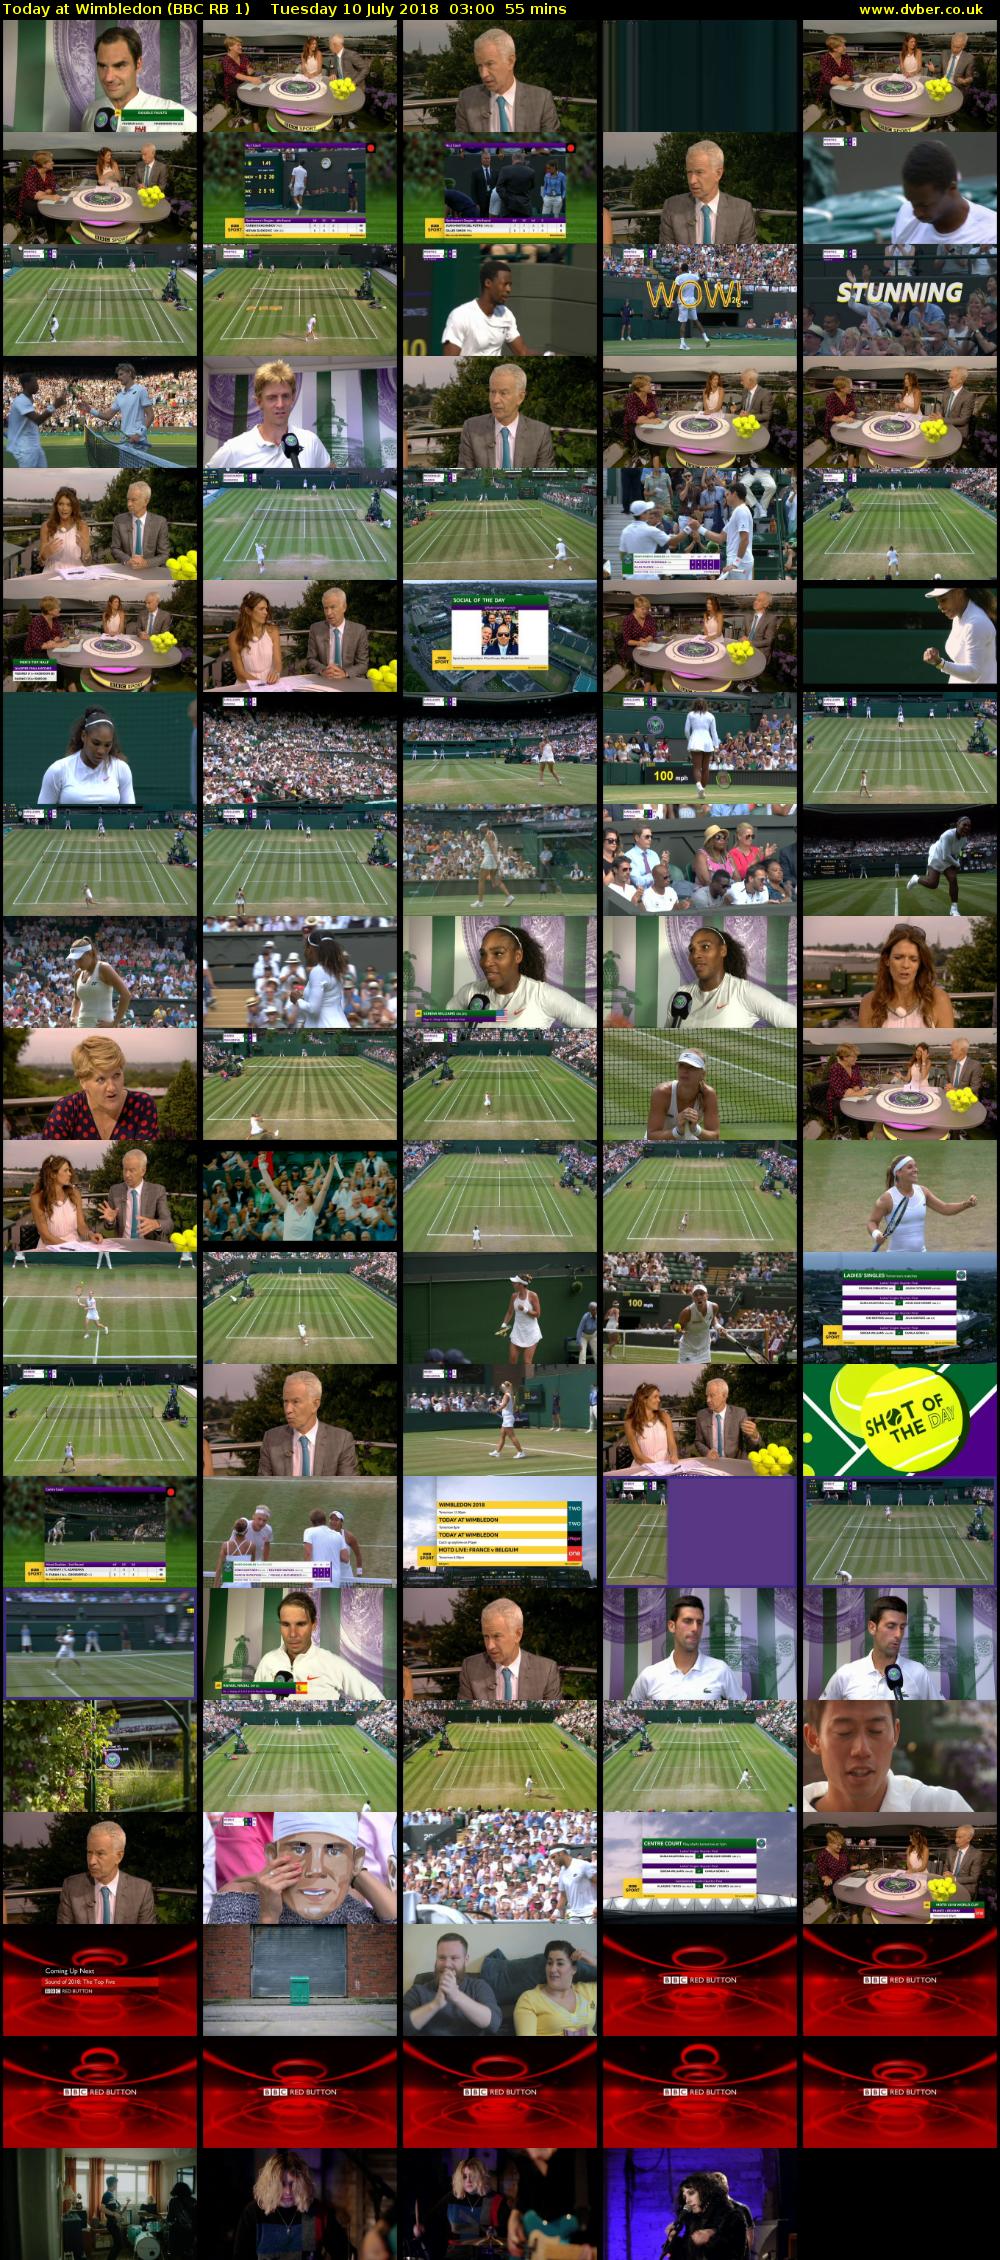 Today at Wimbledon (BBC RB 1) Tuesday 10 July 2018 03:00 - 03:55